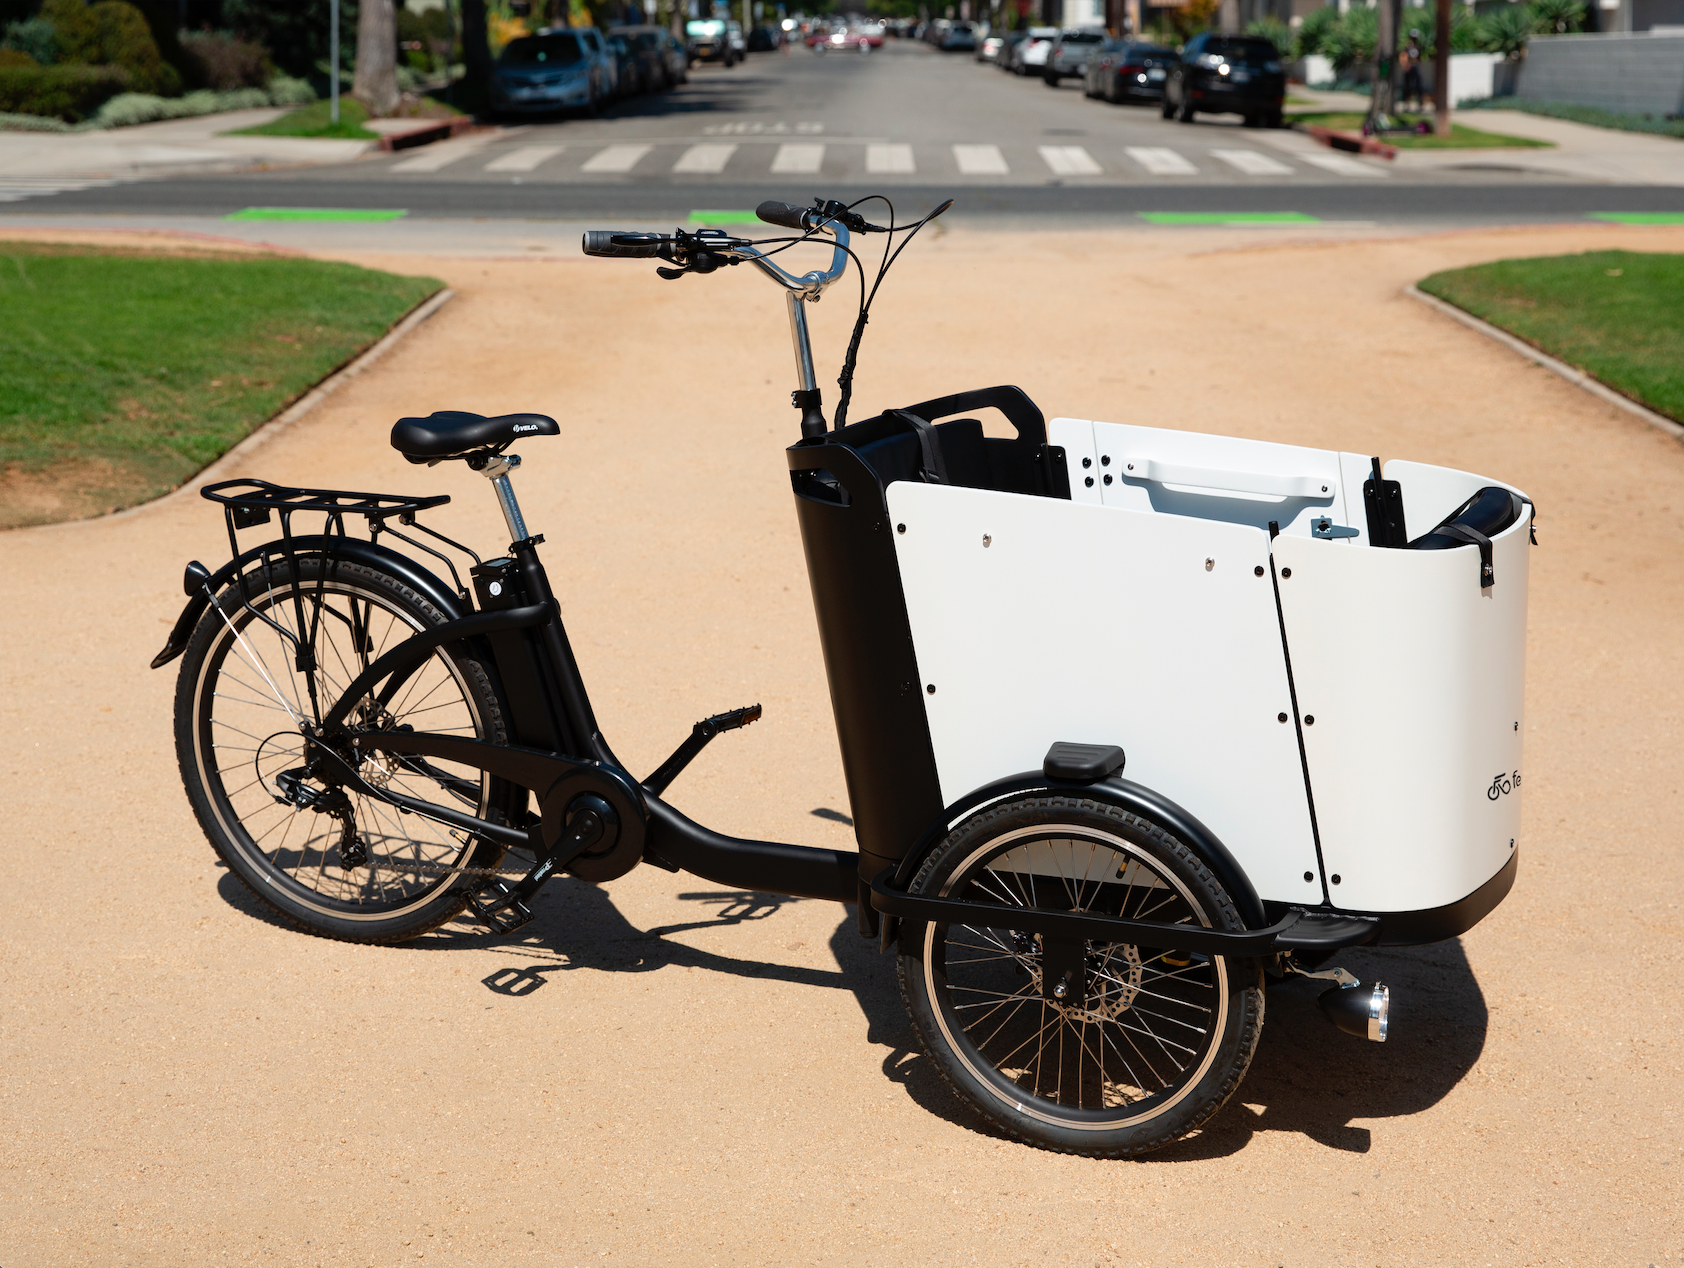 Ferla 3-wheel cargo bicycles for every lifestyle